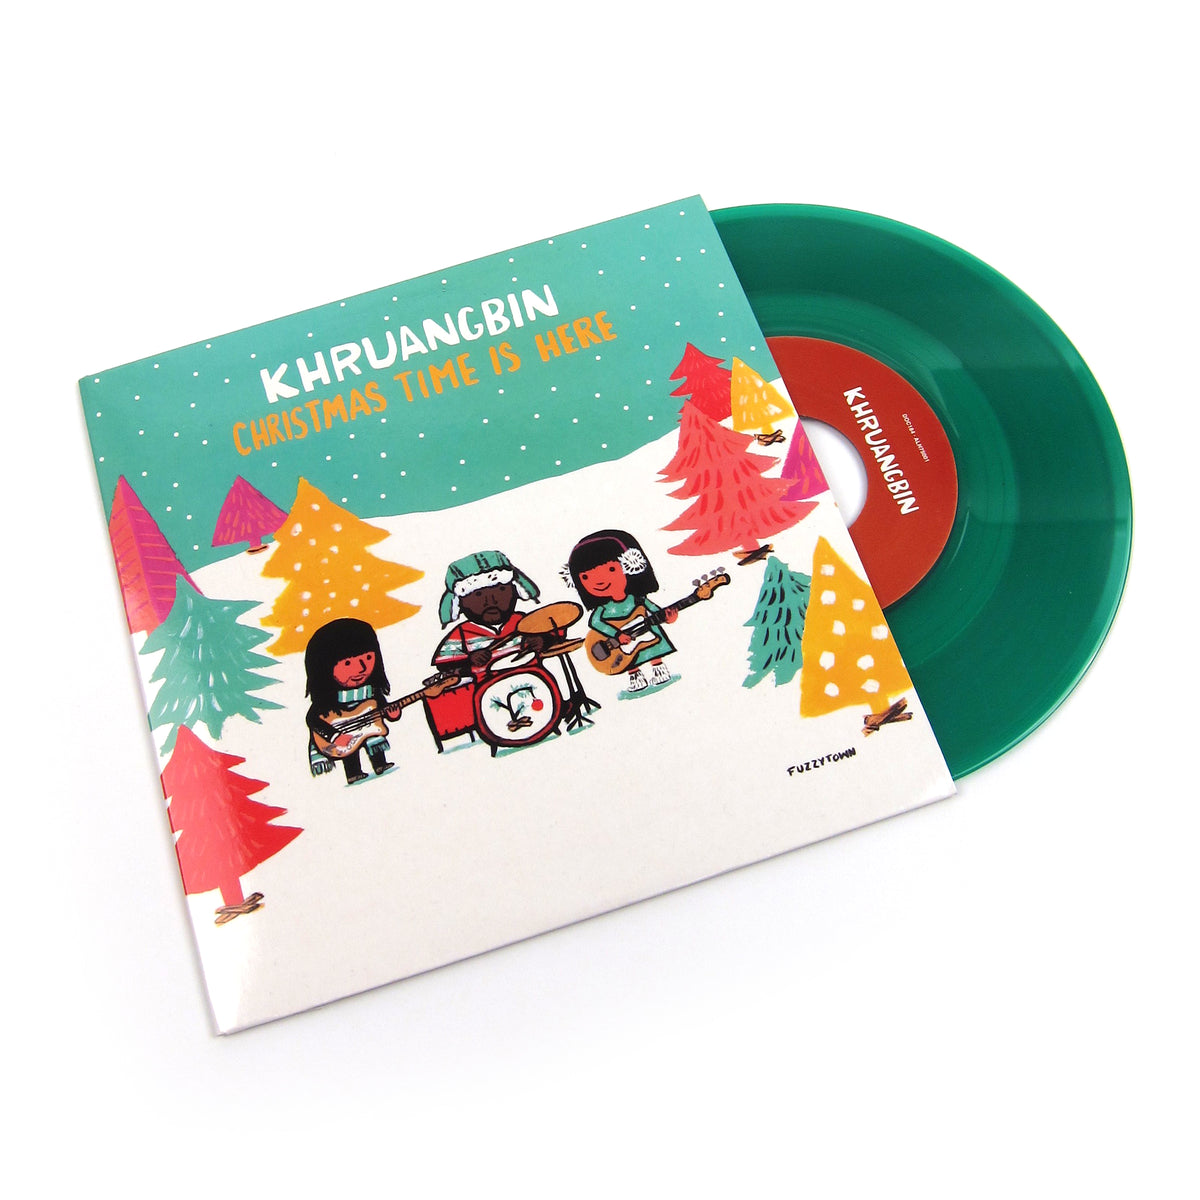 Vince Guaraldi Trio - Christmas Time Is Here - New 7 Single